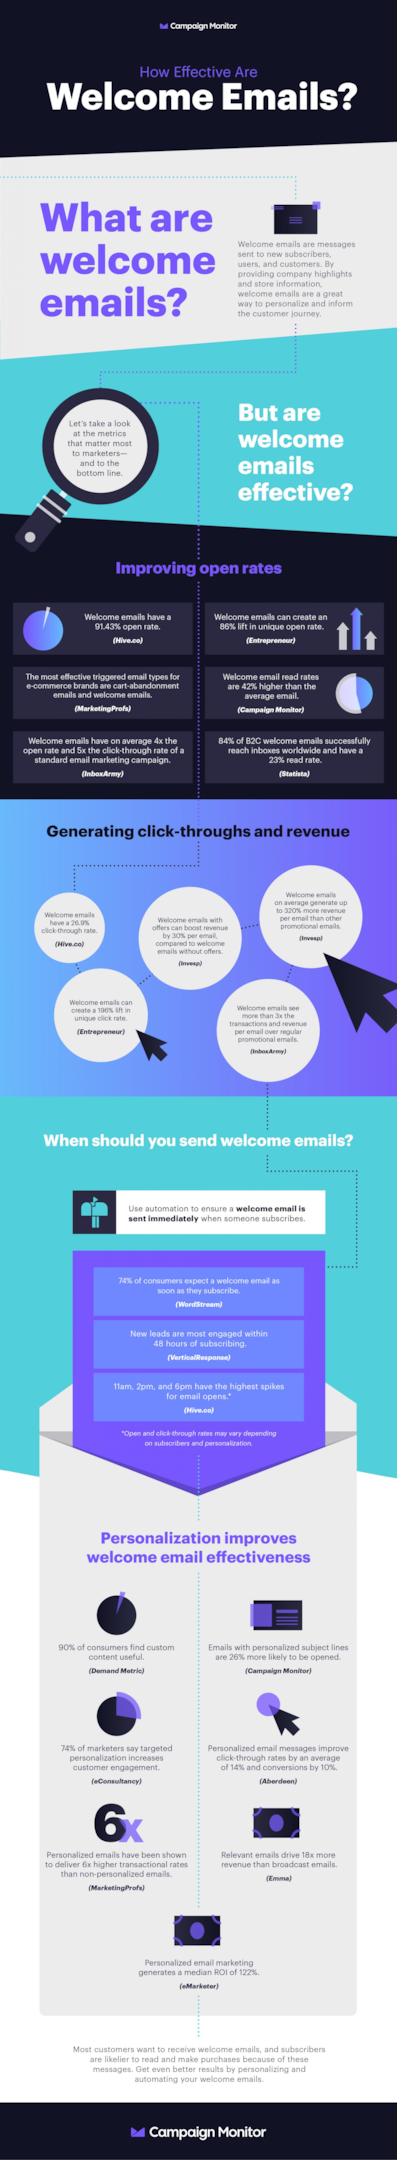 Image Source: Oberlo - How effective are welcome emails? | TheBloggingBox.com 